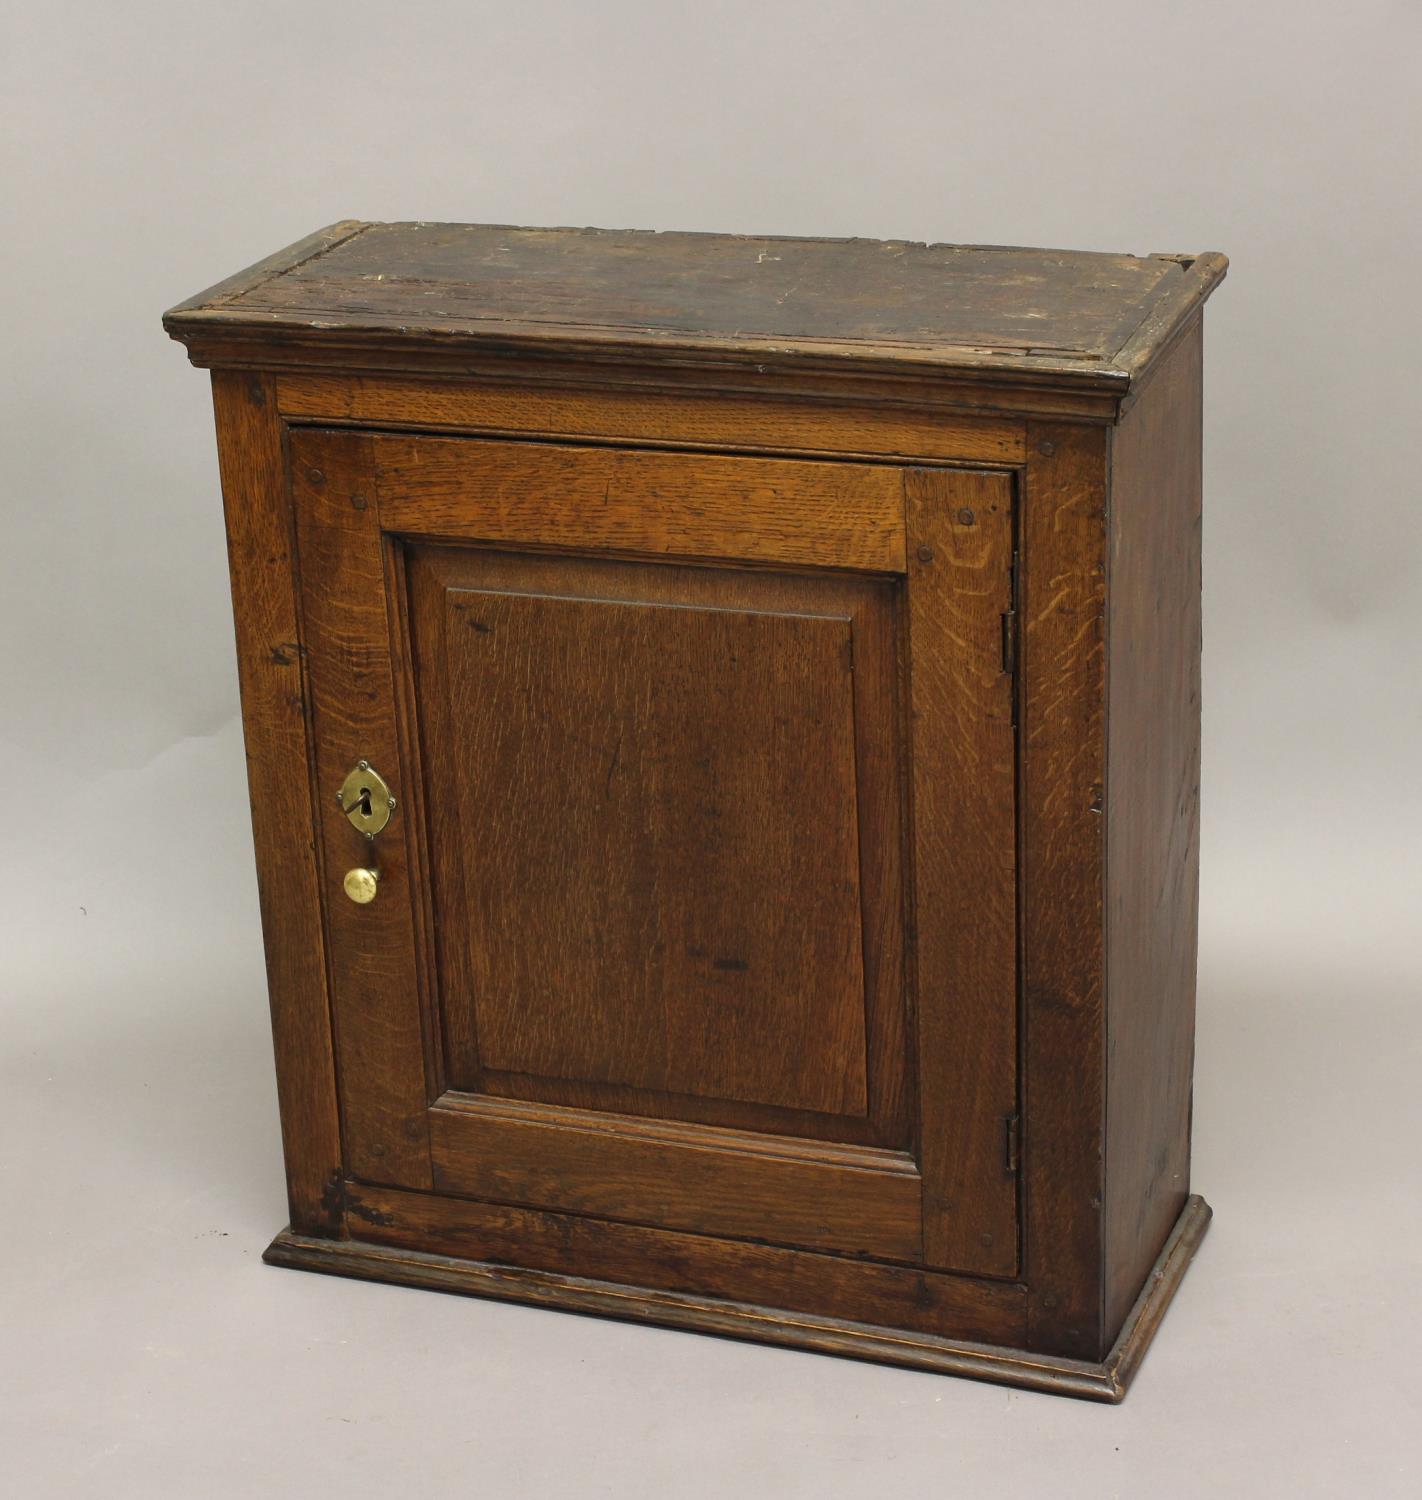 AN 18TH CENTURY OAK CUPBOARD, with panelled door, the interior with a single shelf, height 68cm,